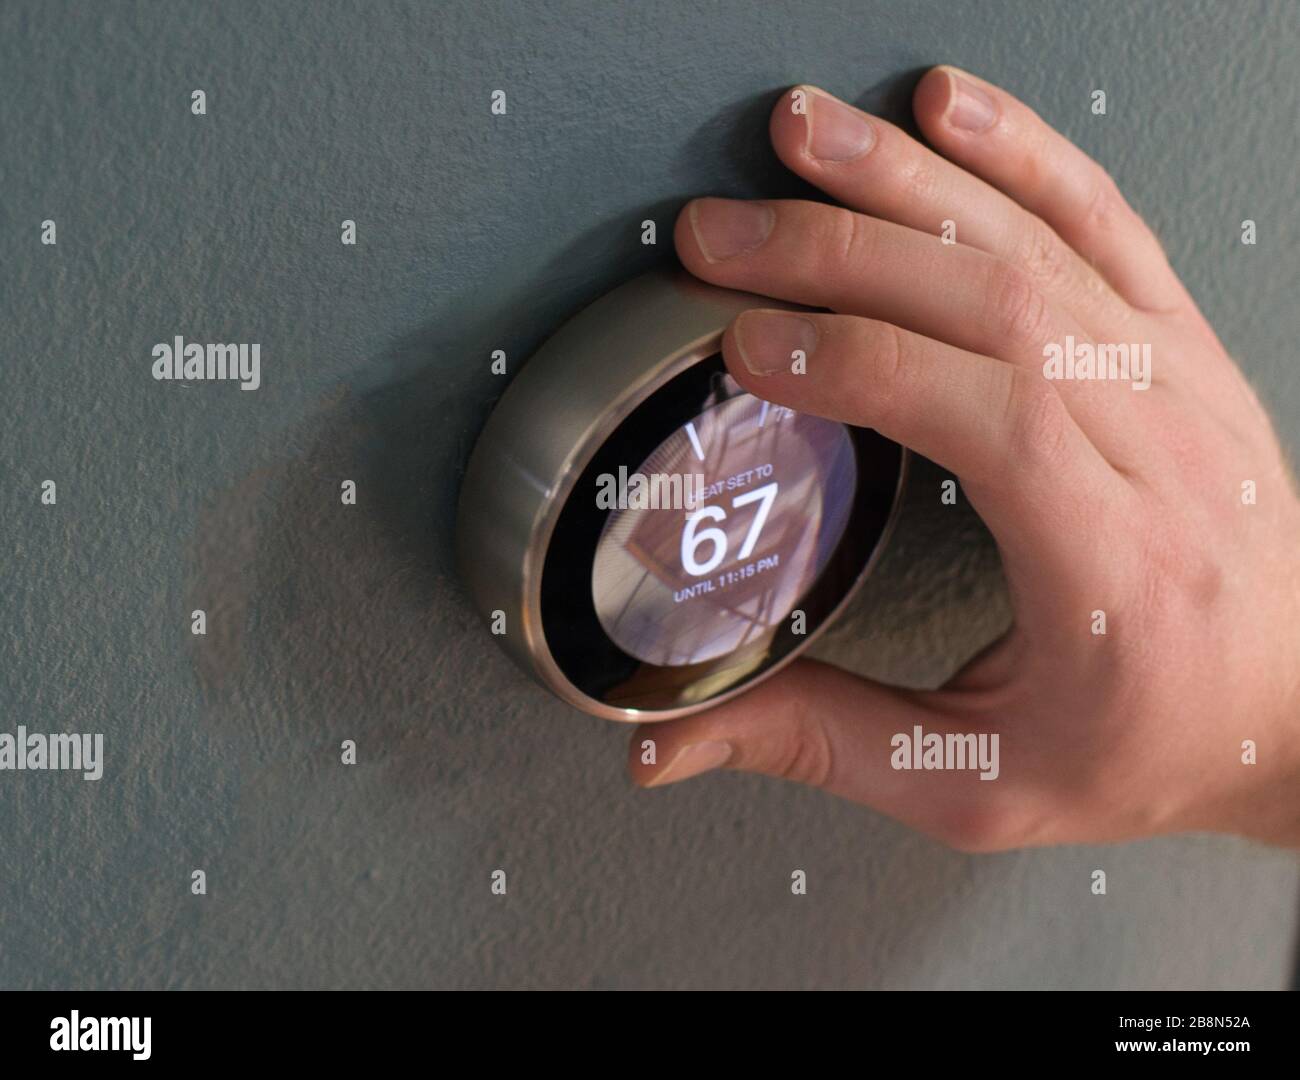 Hand adjusting the dial on smart home thermostat. Pressing center button to save money heating and cooling. Stock Photo